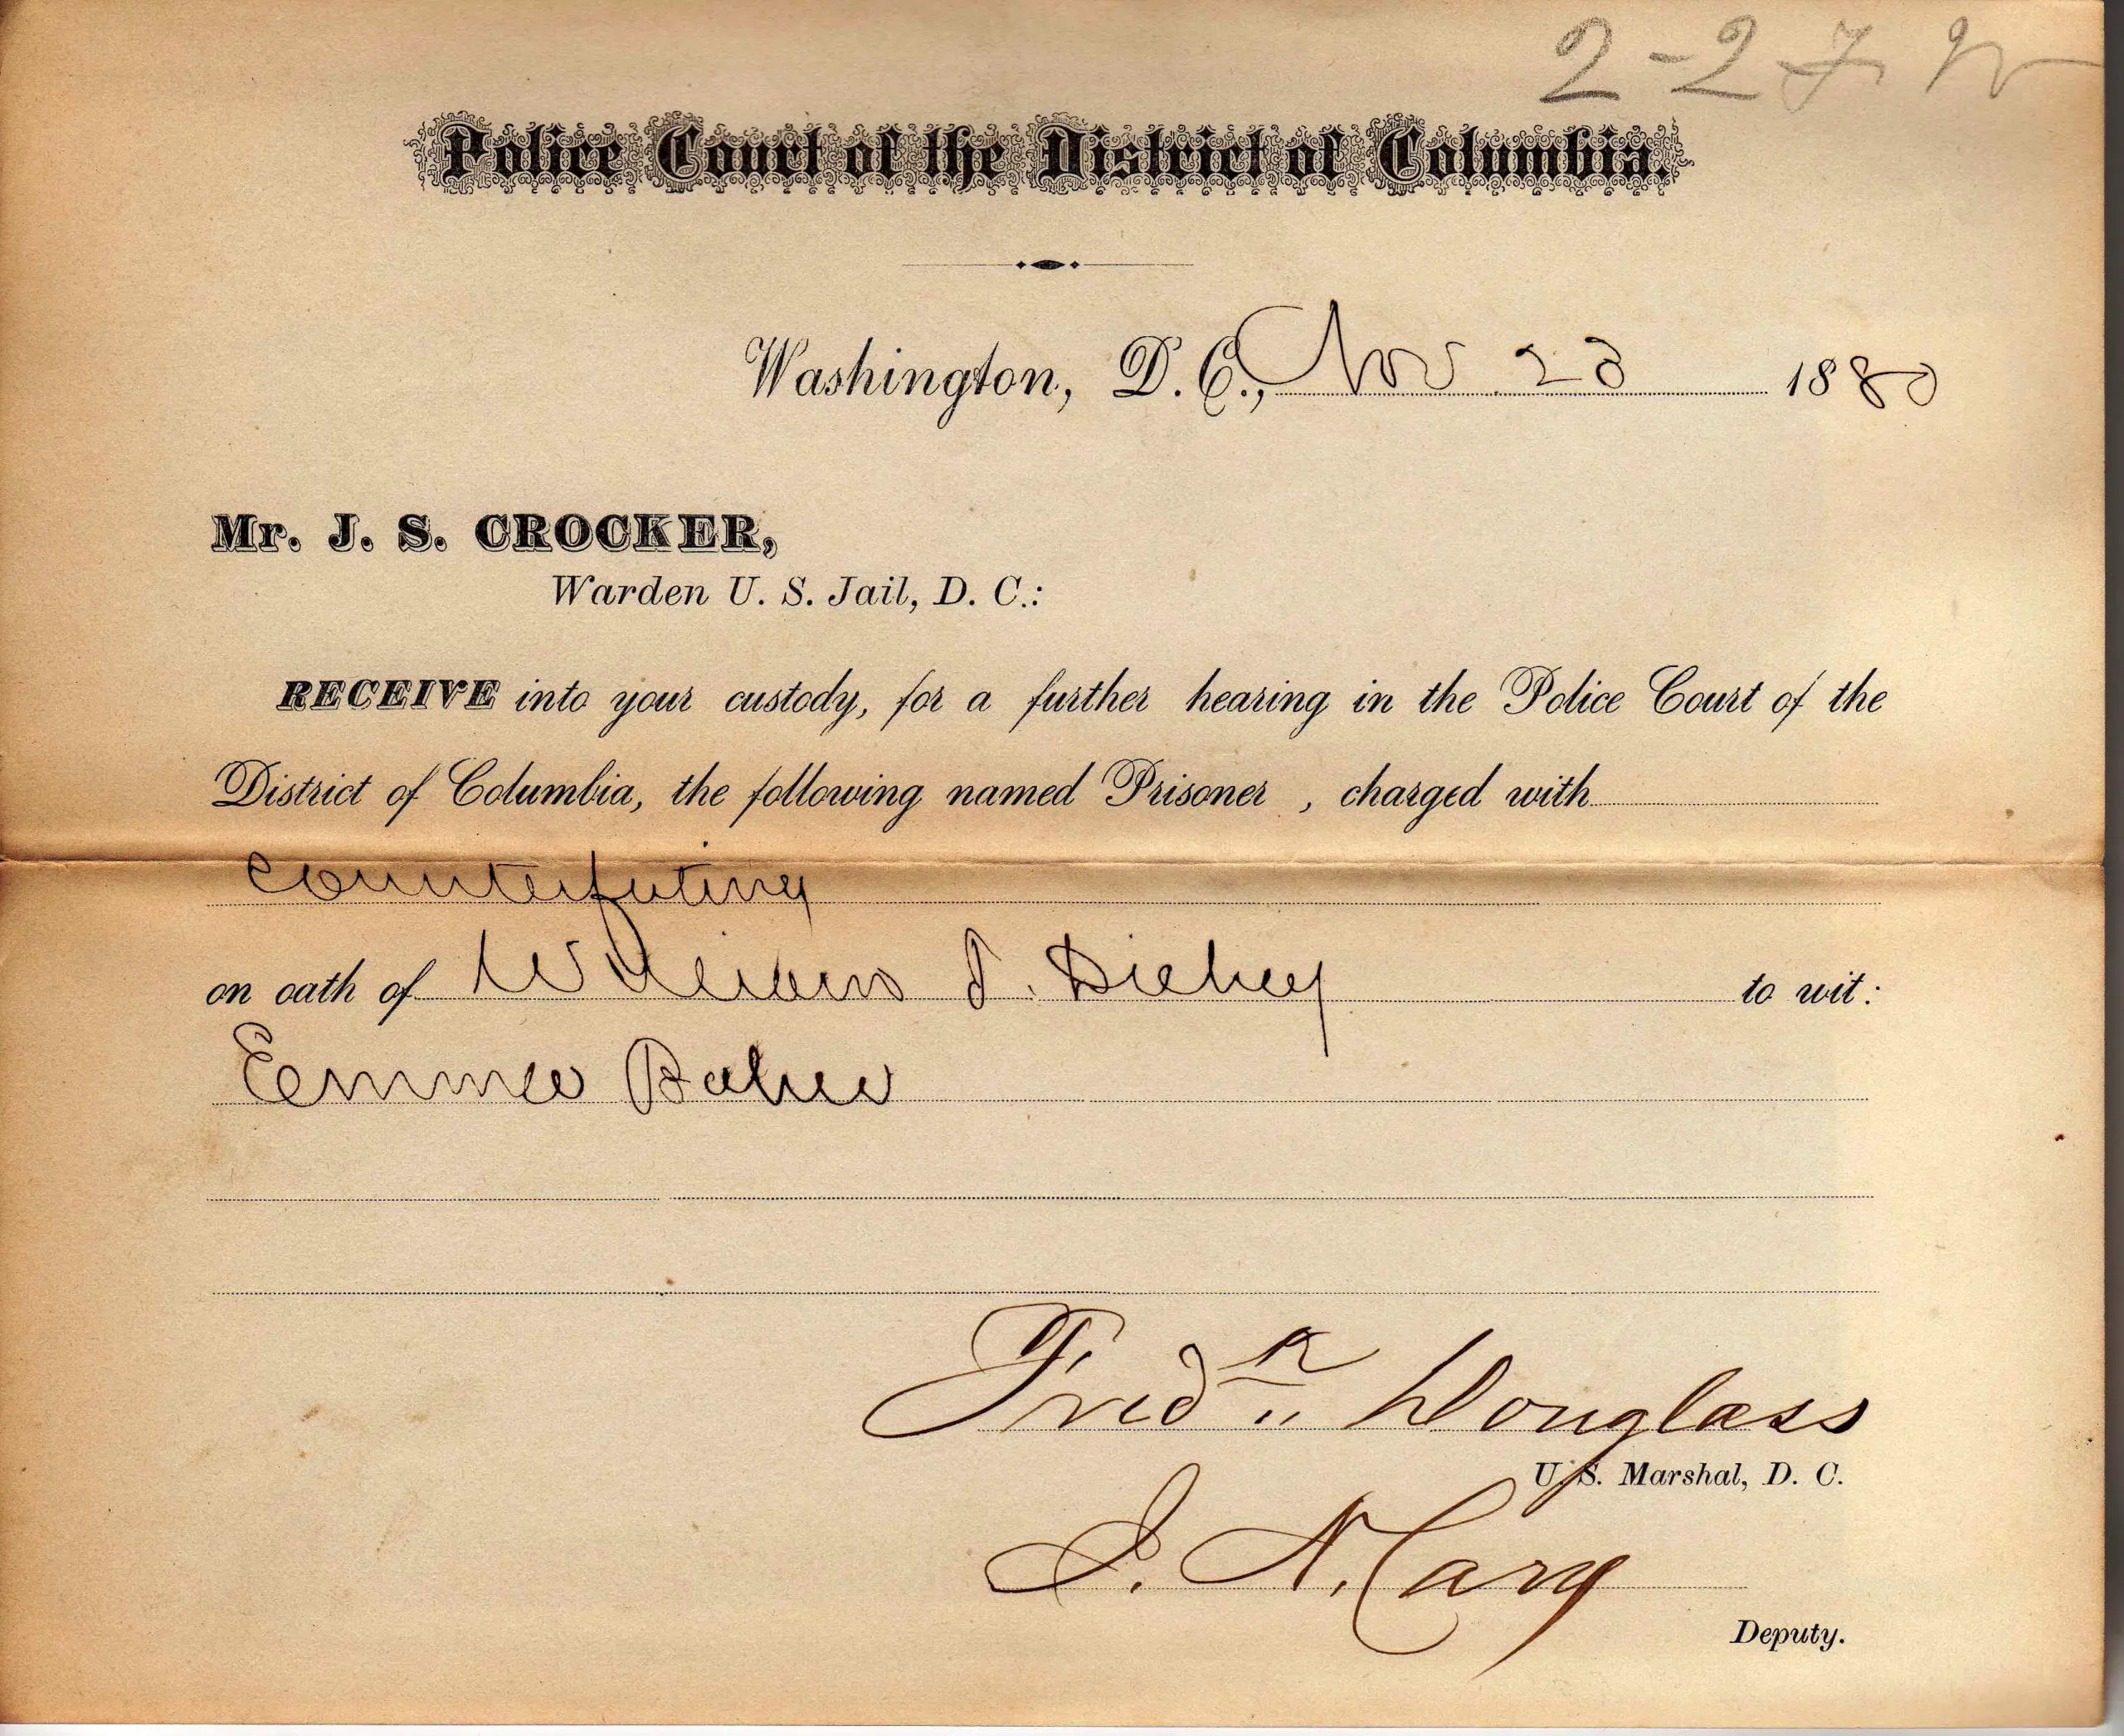 Jail transfer from the Police Court signed by Marshal Douglass, Nov. 28, 1880. Photo Workhouse Prison Museum at Lorton.